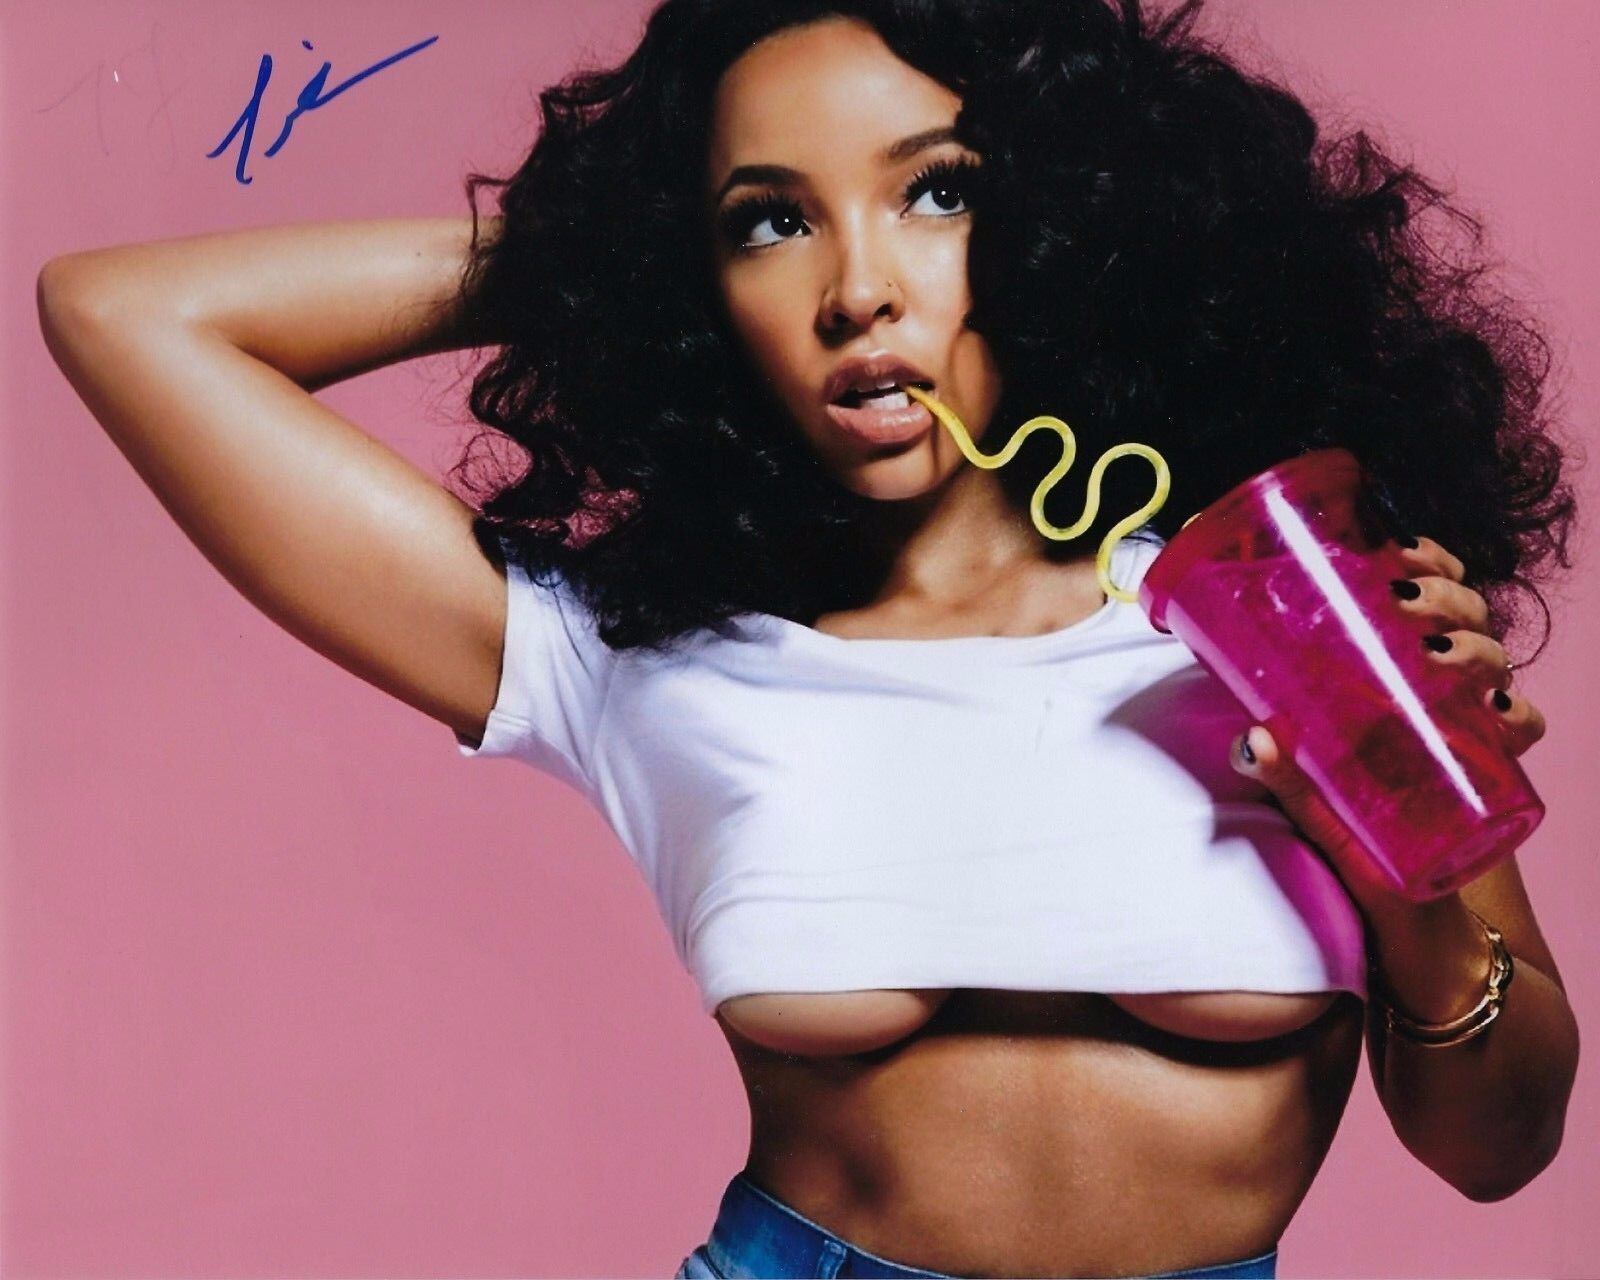 GFA Sexy Singer 2 On * TINASHE * Signed Autograph 8x10 Photo Poster painting PROOF AD4 COA